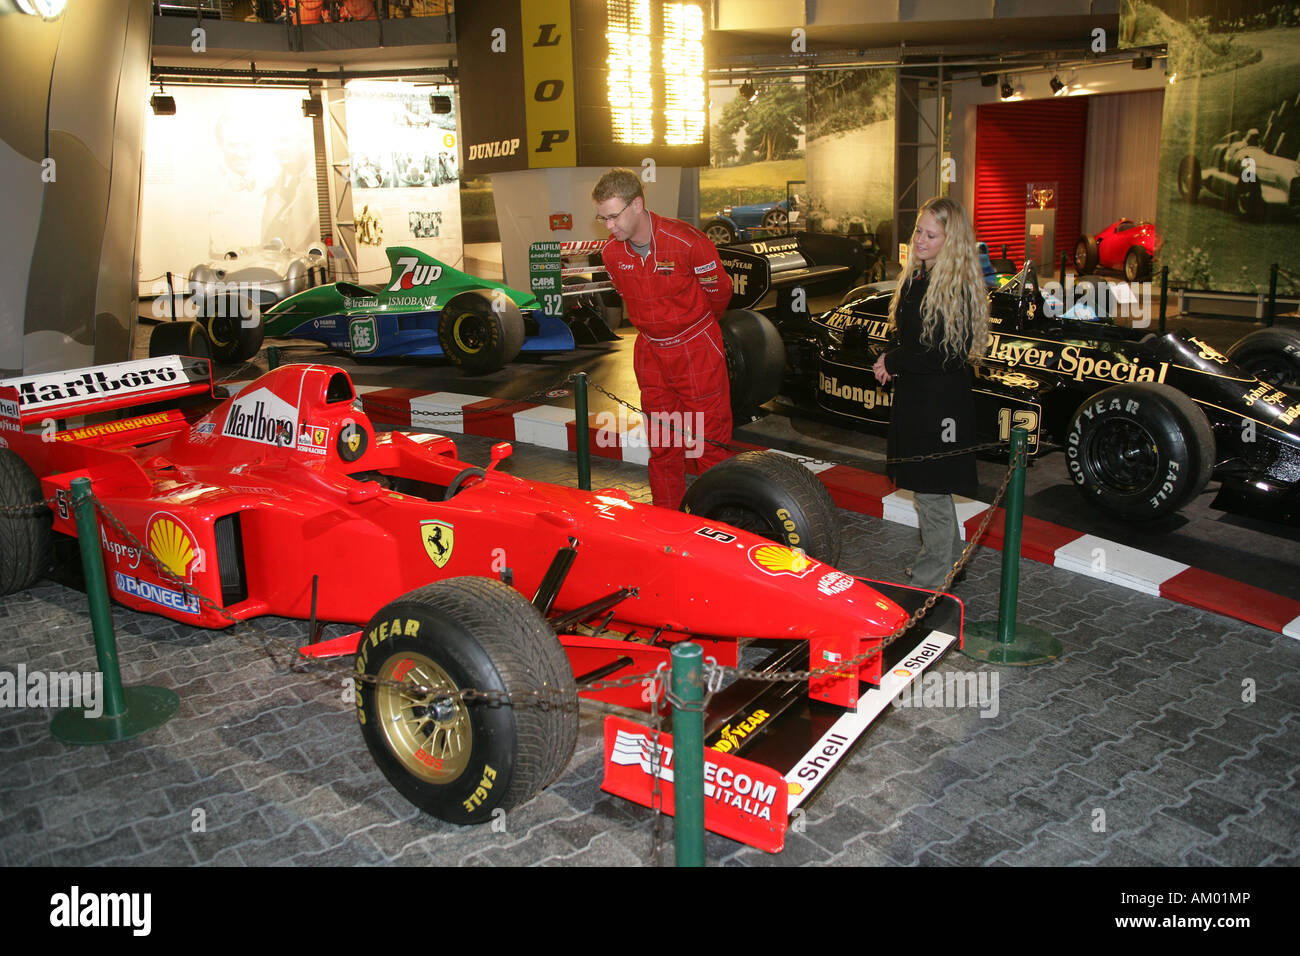 Racing car of Michael Schumacher: Ferrari from 1997 at the Erlebniswelt Musuem on the Nuerburgring Rhineland-Palatinate germany Stock Photo